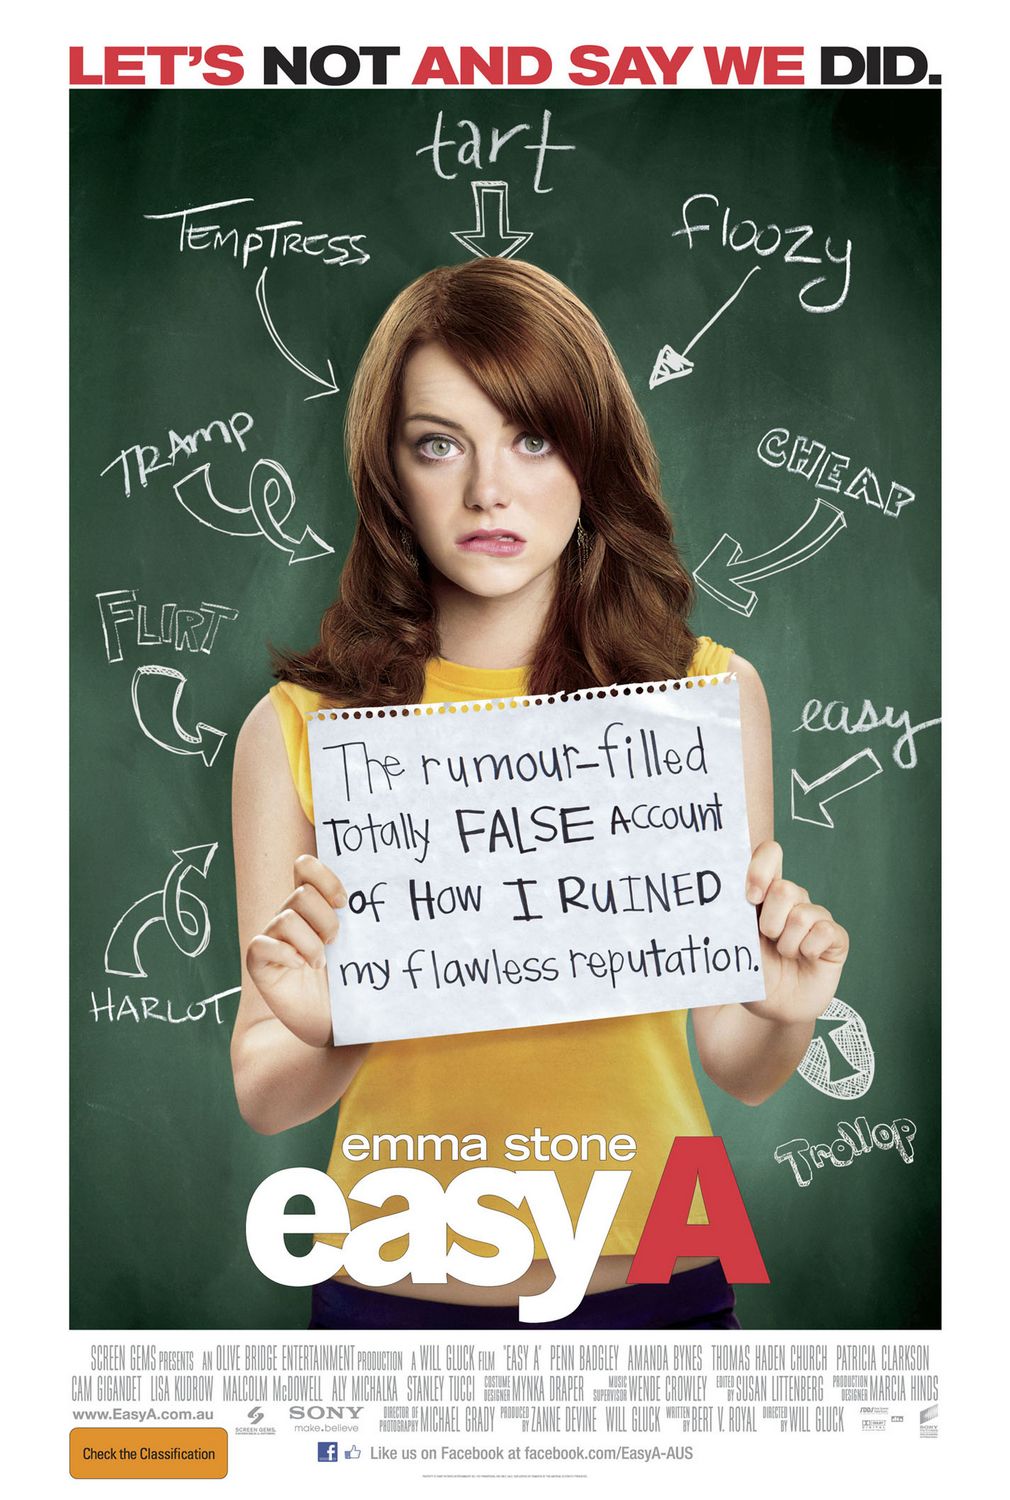  Easy A poster from Australia